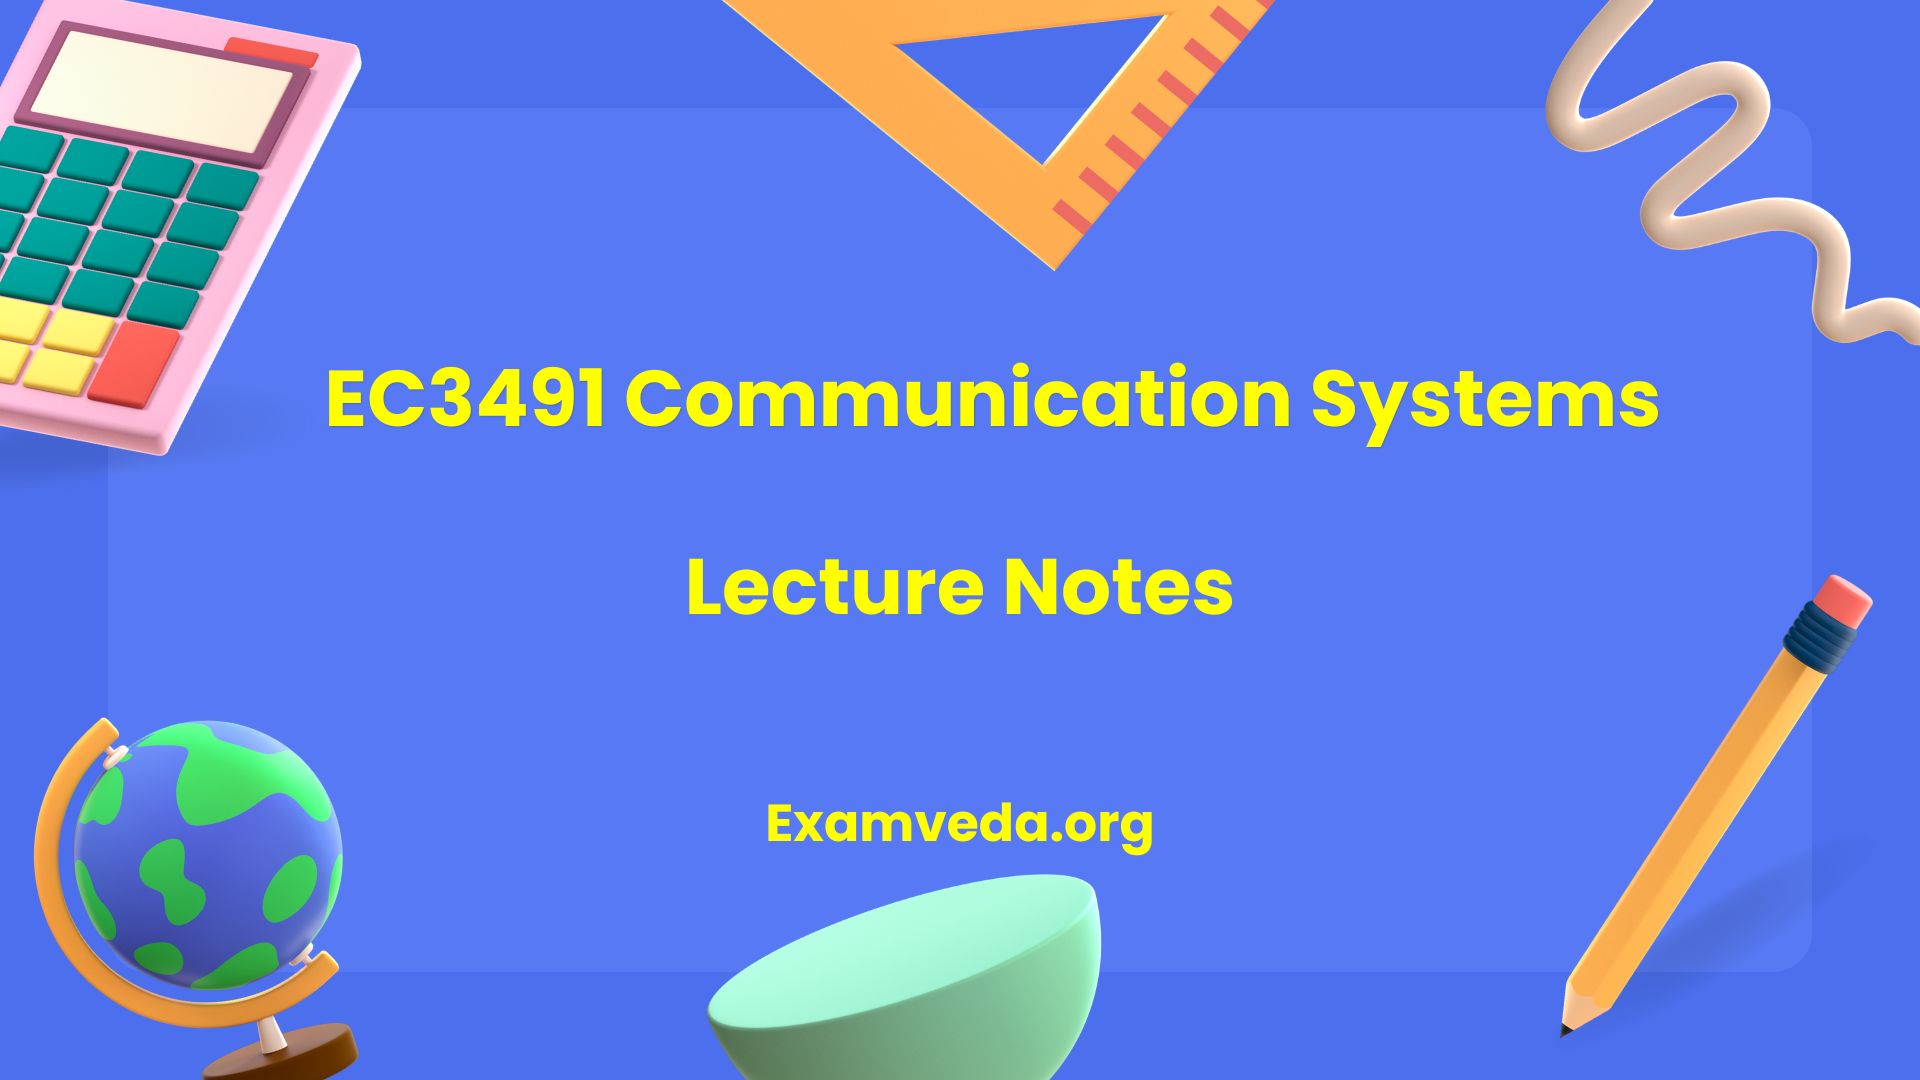 EC3491 Communication Systems Lecture Notes